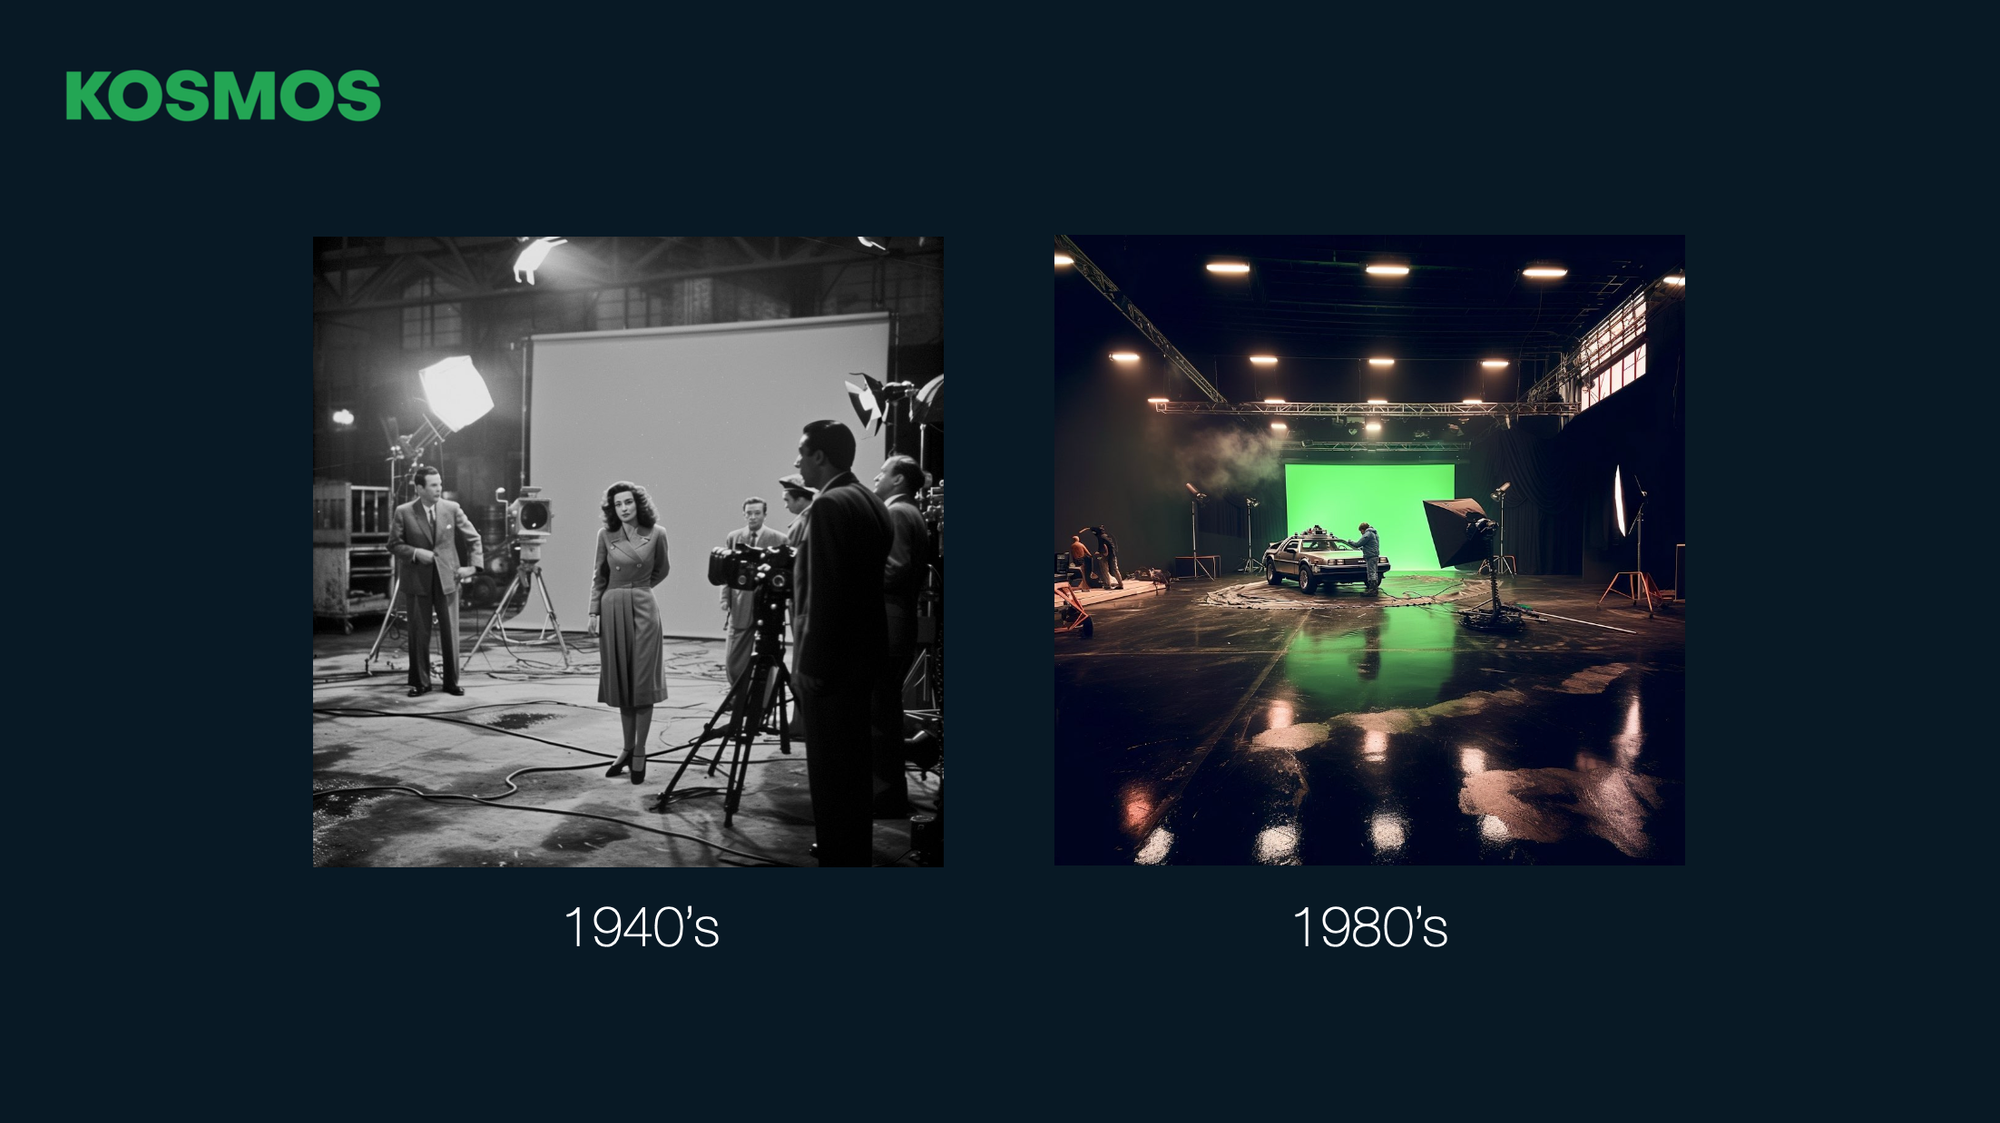 Green screens signal special effects in action, yet this seemingly modern technology dates back to the 1940s.